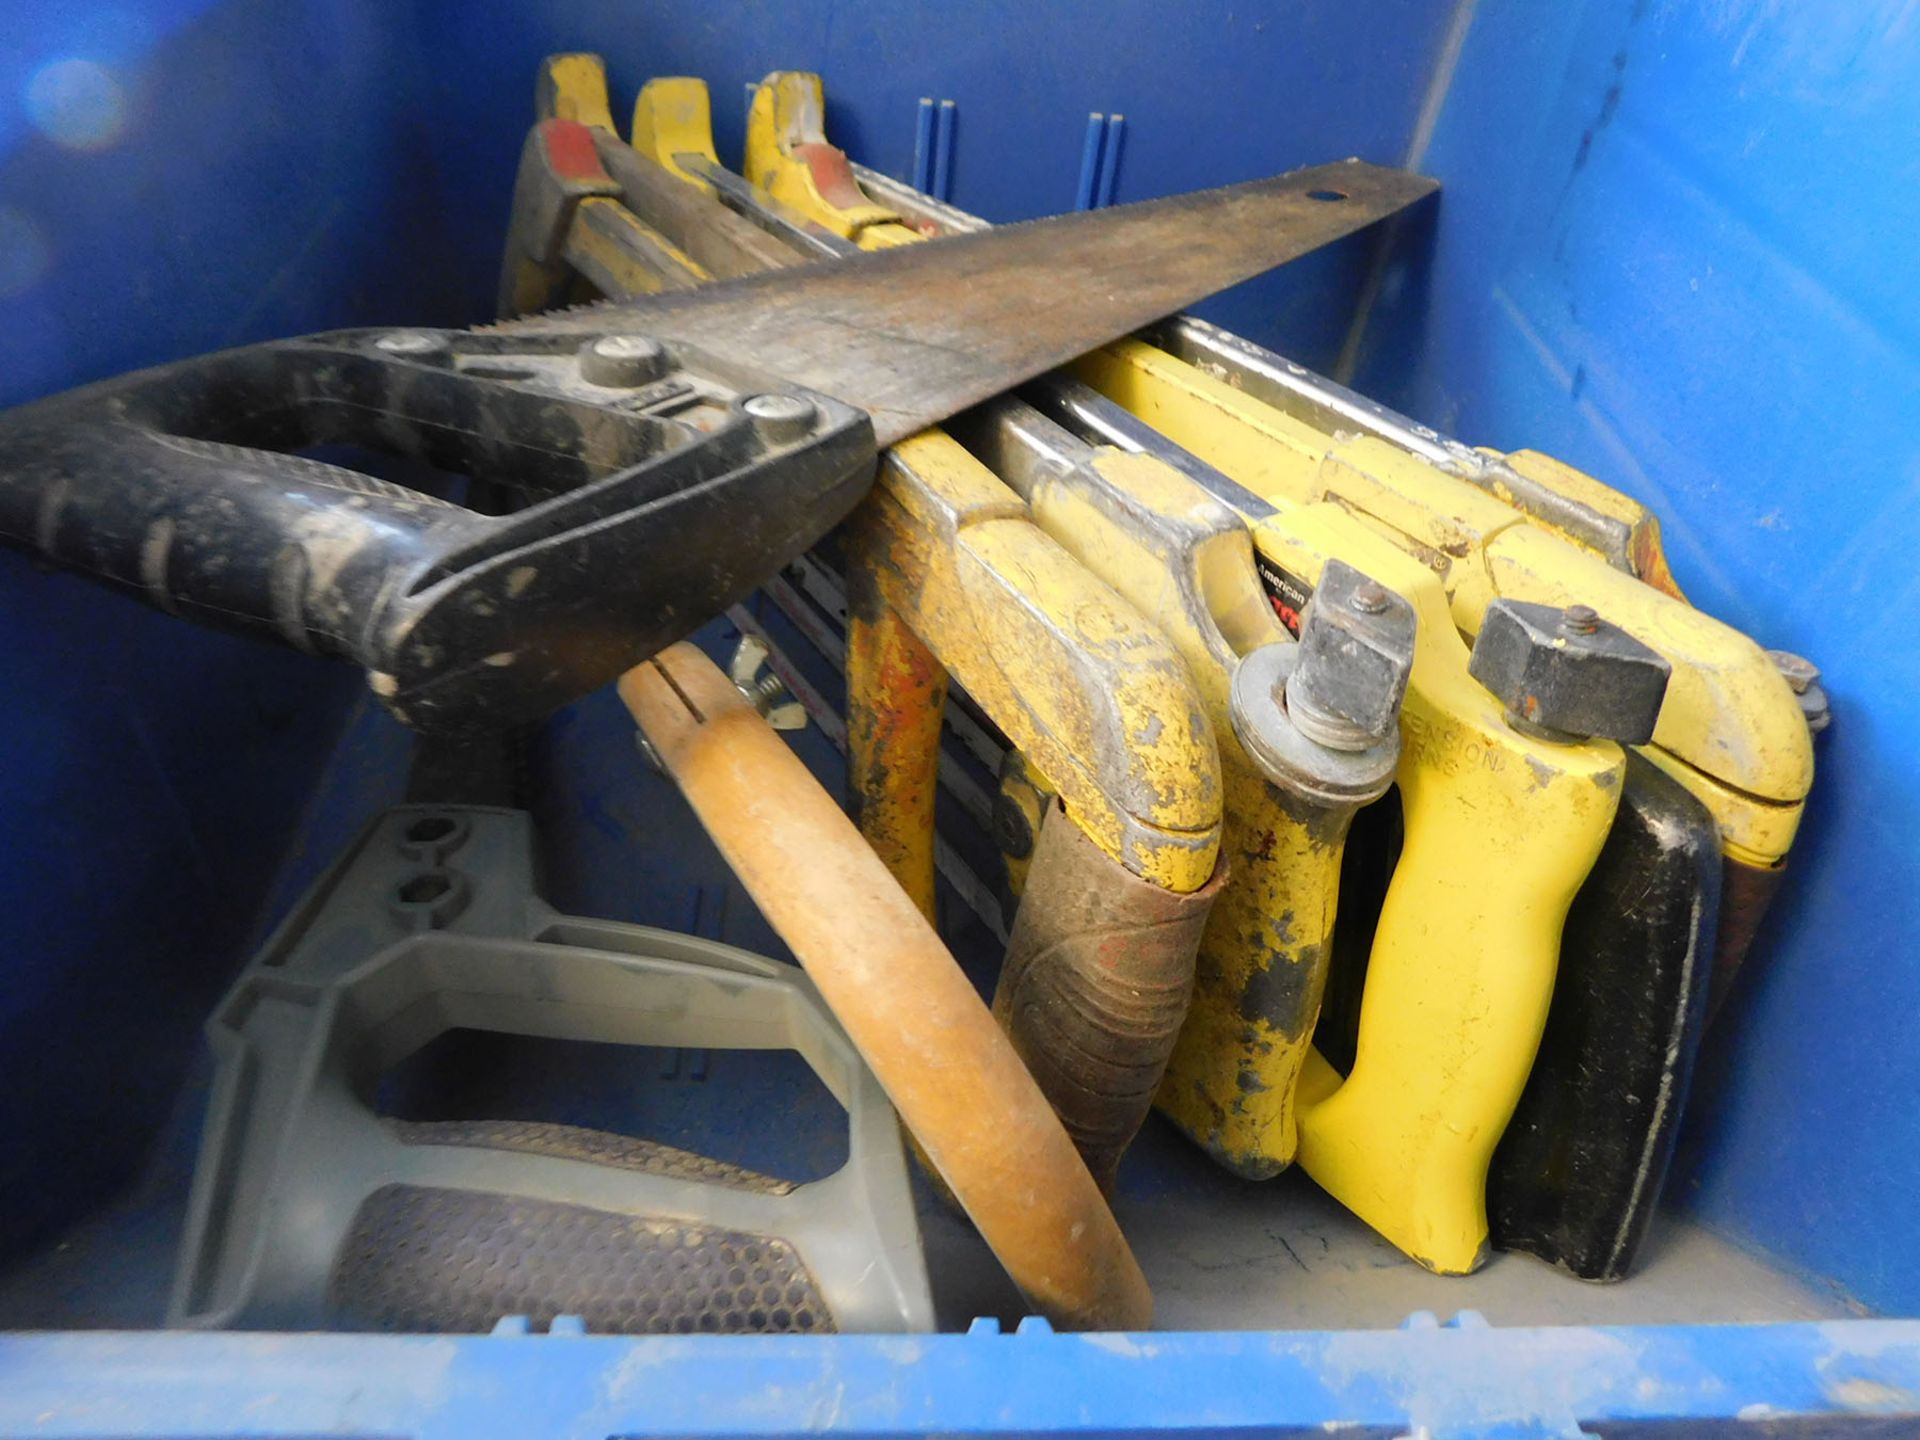 TOTE OF HANDSAWS